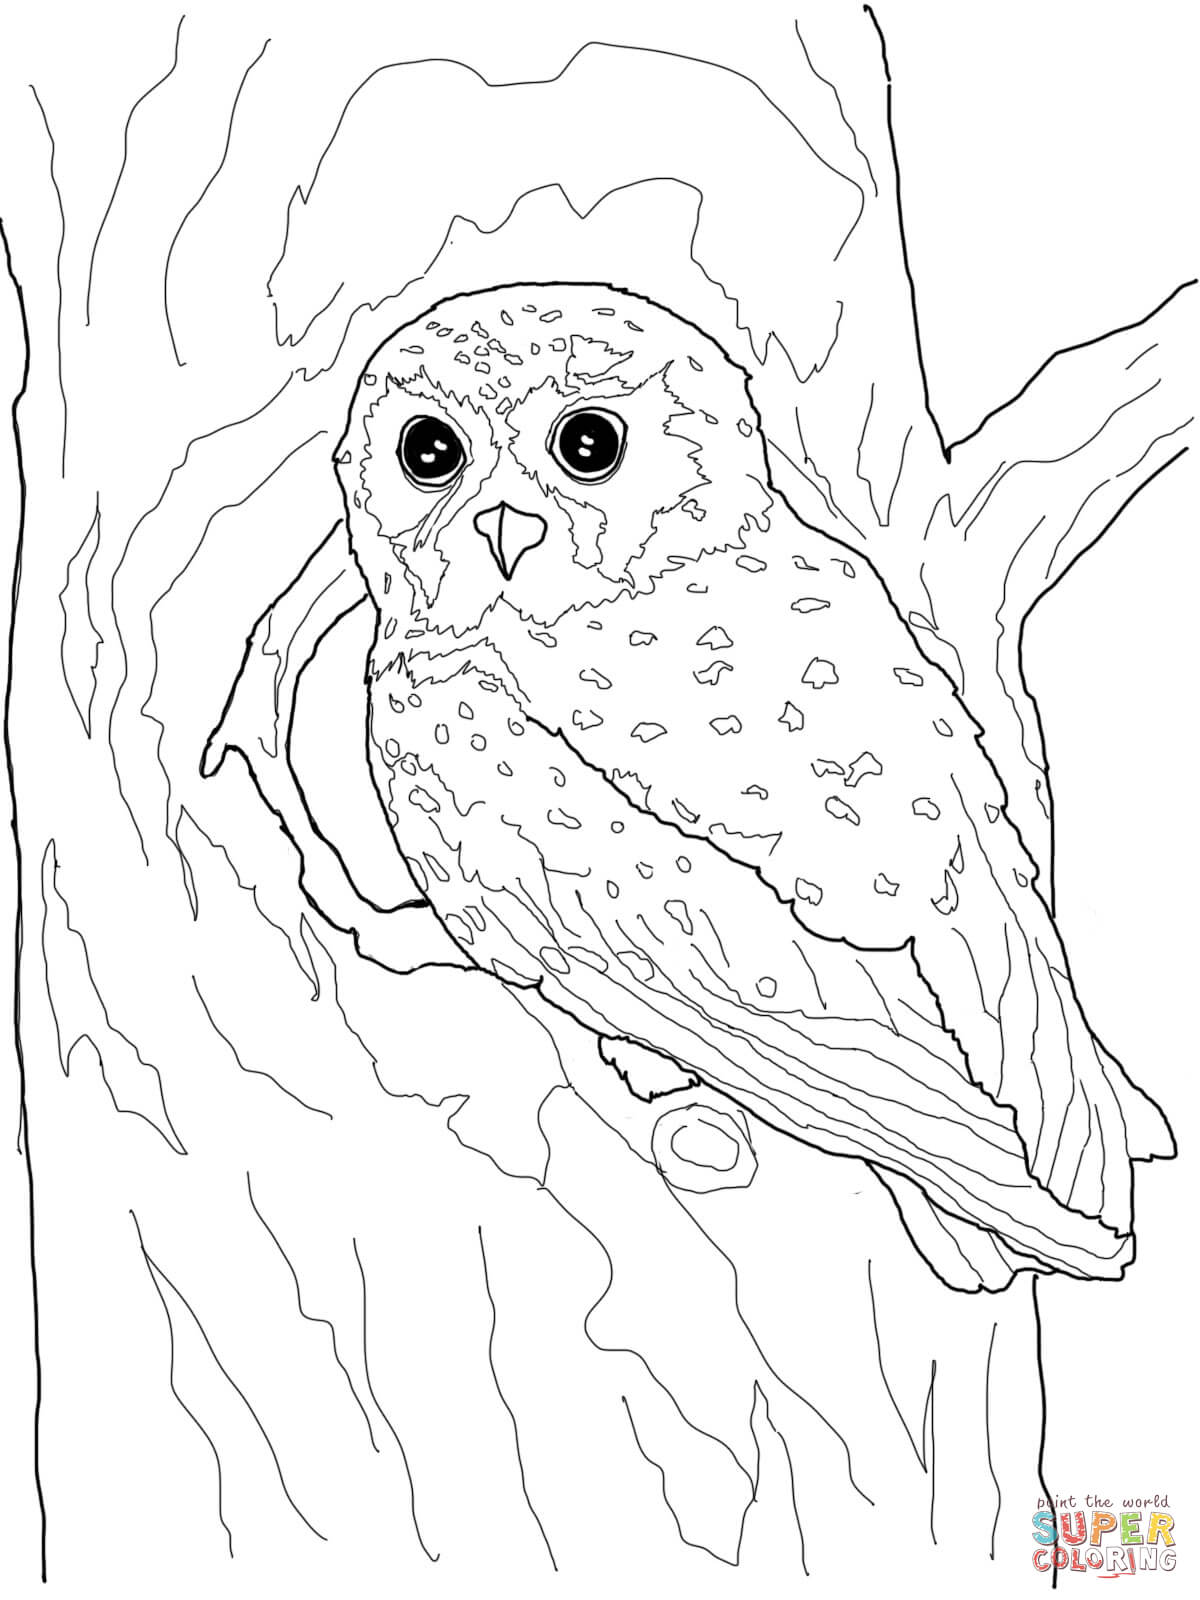 Elf Owl coloring page | Free Printable Coloring Pages